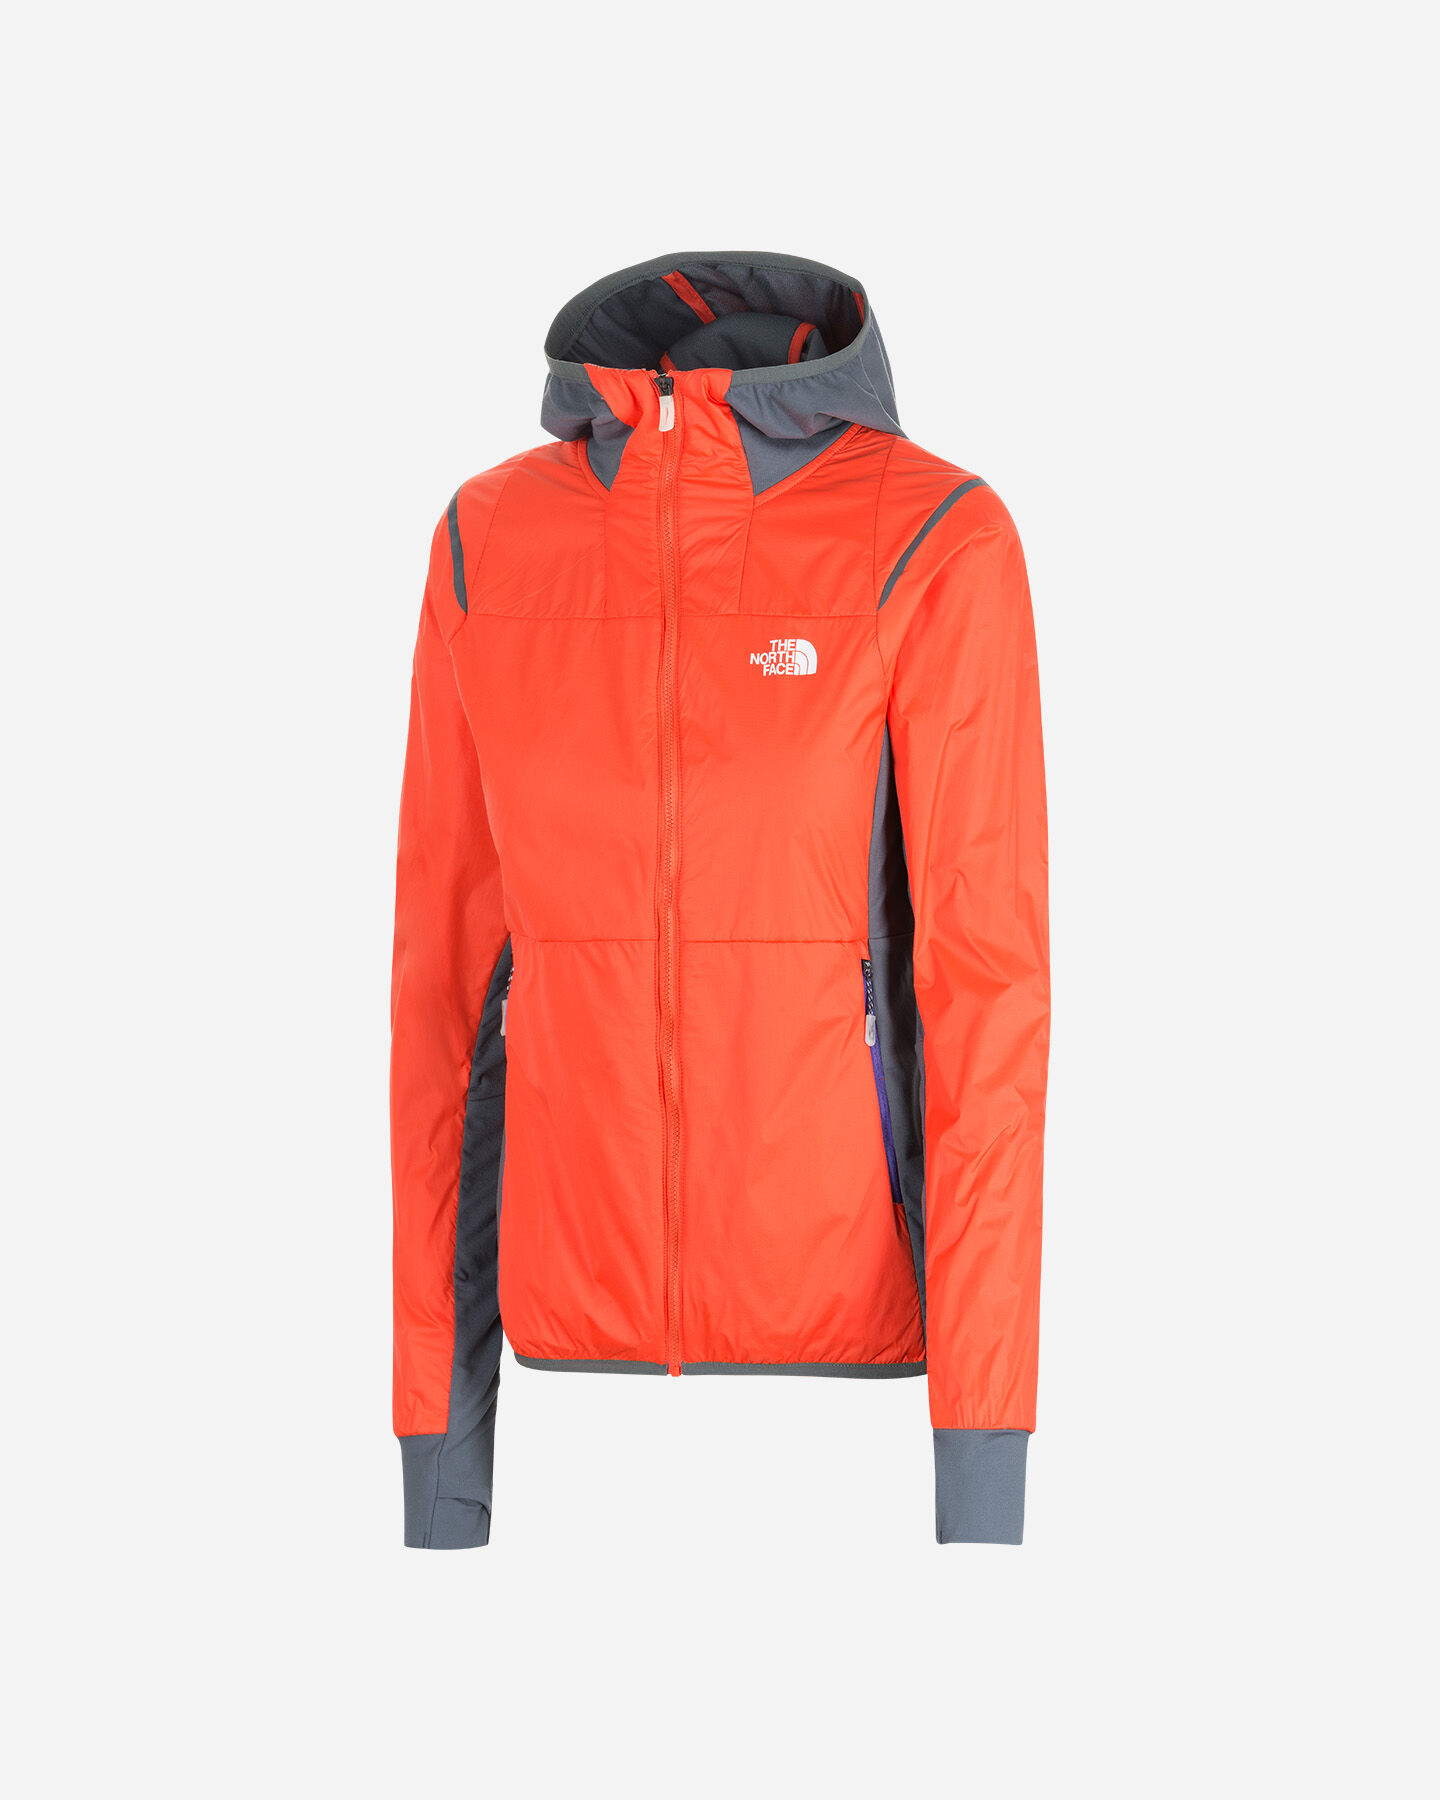  Pile THE NORTH FACE SPEEDTOUR FZ HD W S5243530|U88|XS scatto 0